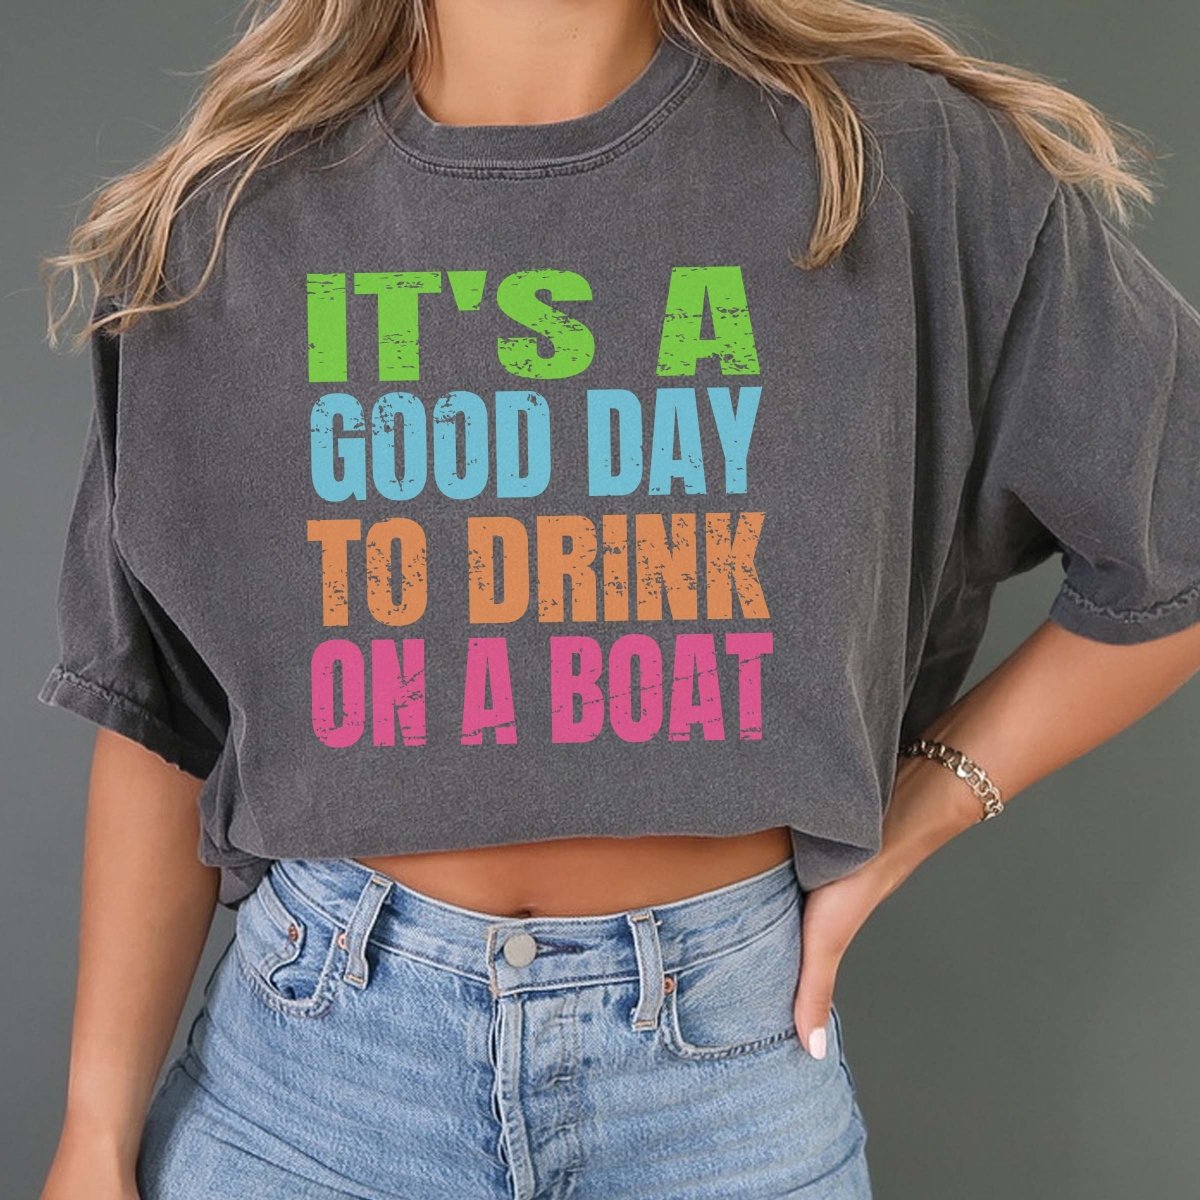 Good Day To Drink On A Boat Comfort Color Wholesale Tee - Fast Shipping - Limeberry Designs